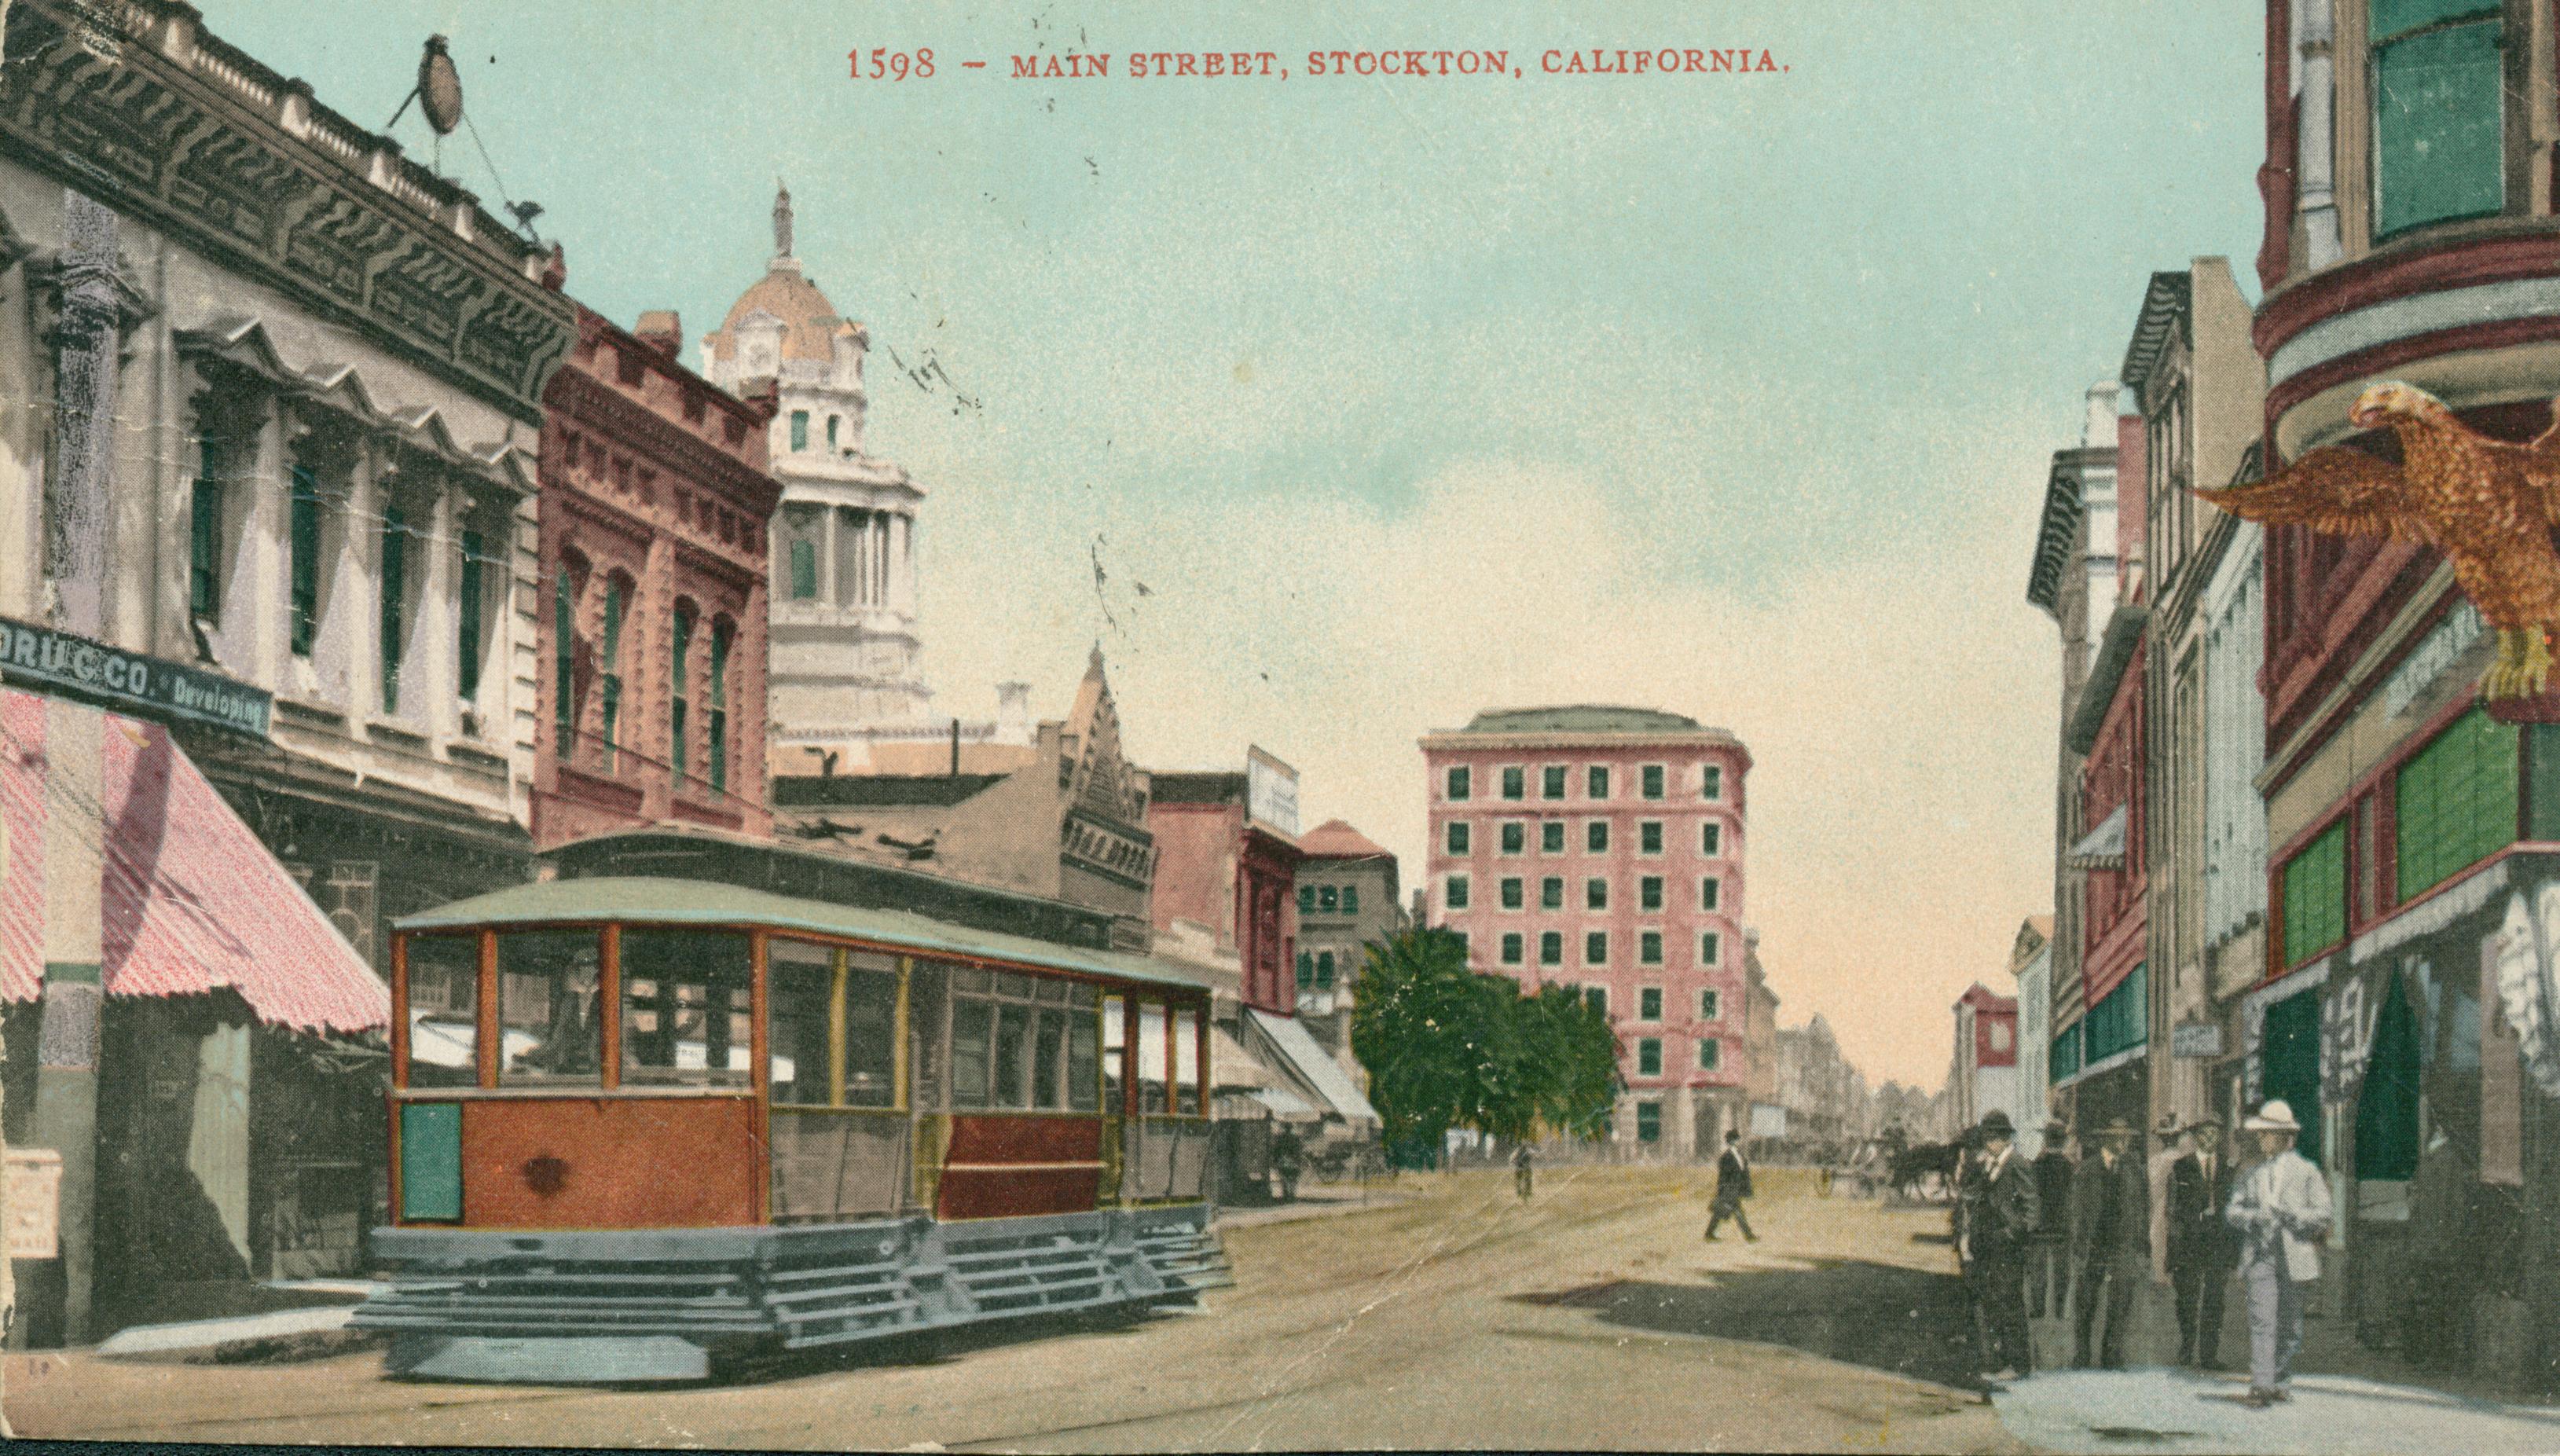 View of Main Street, buildings on either side of the street with a trolley and tracks down the center of the street, people waiting on the corner